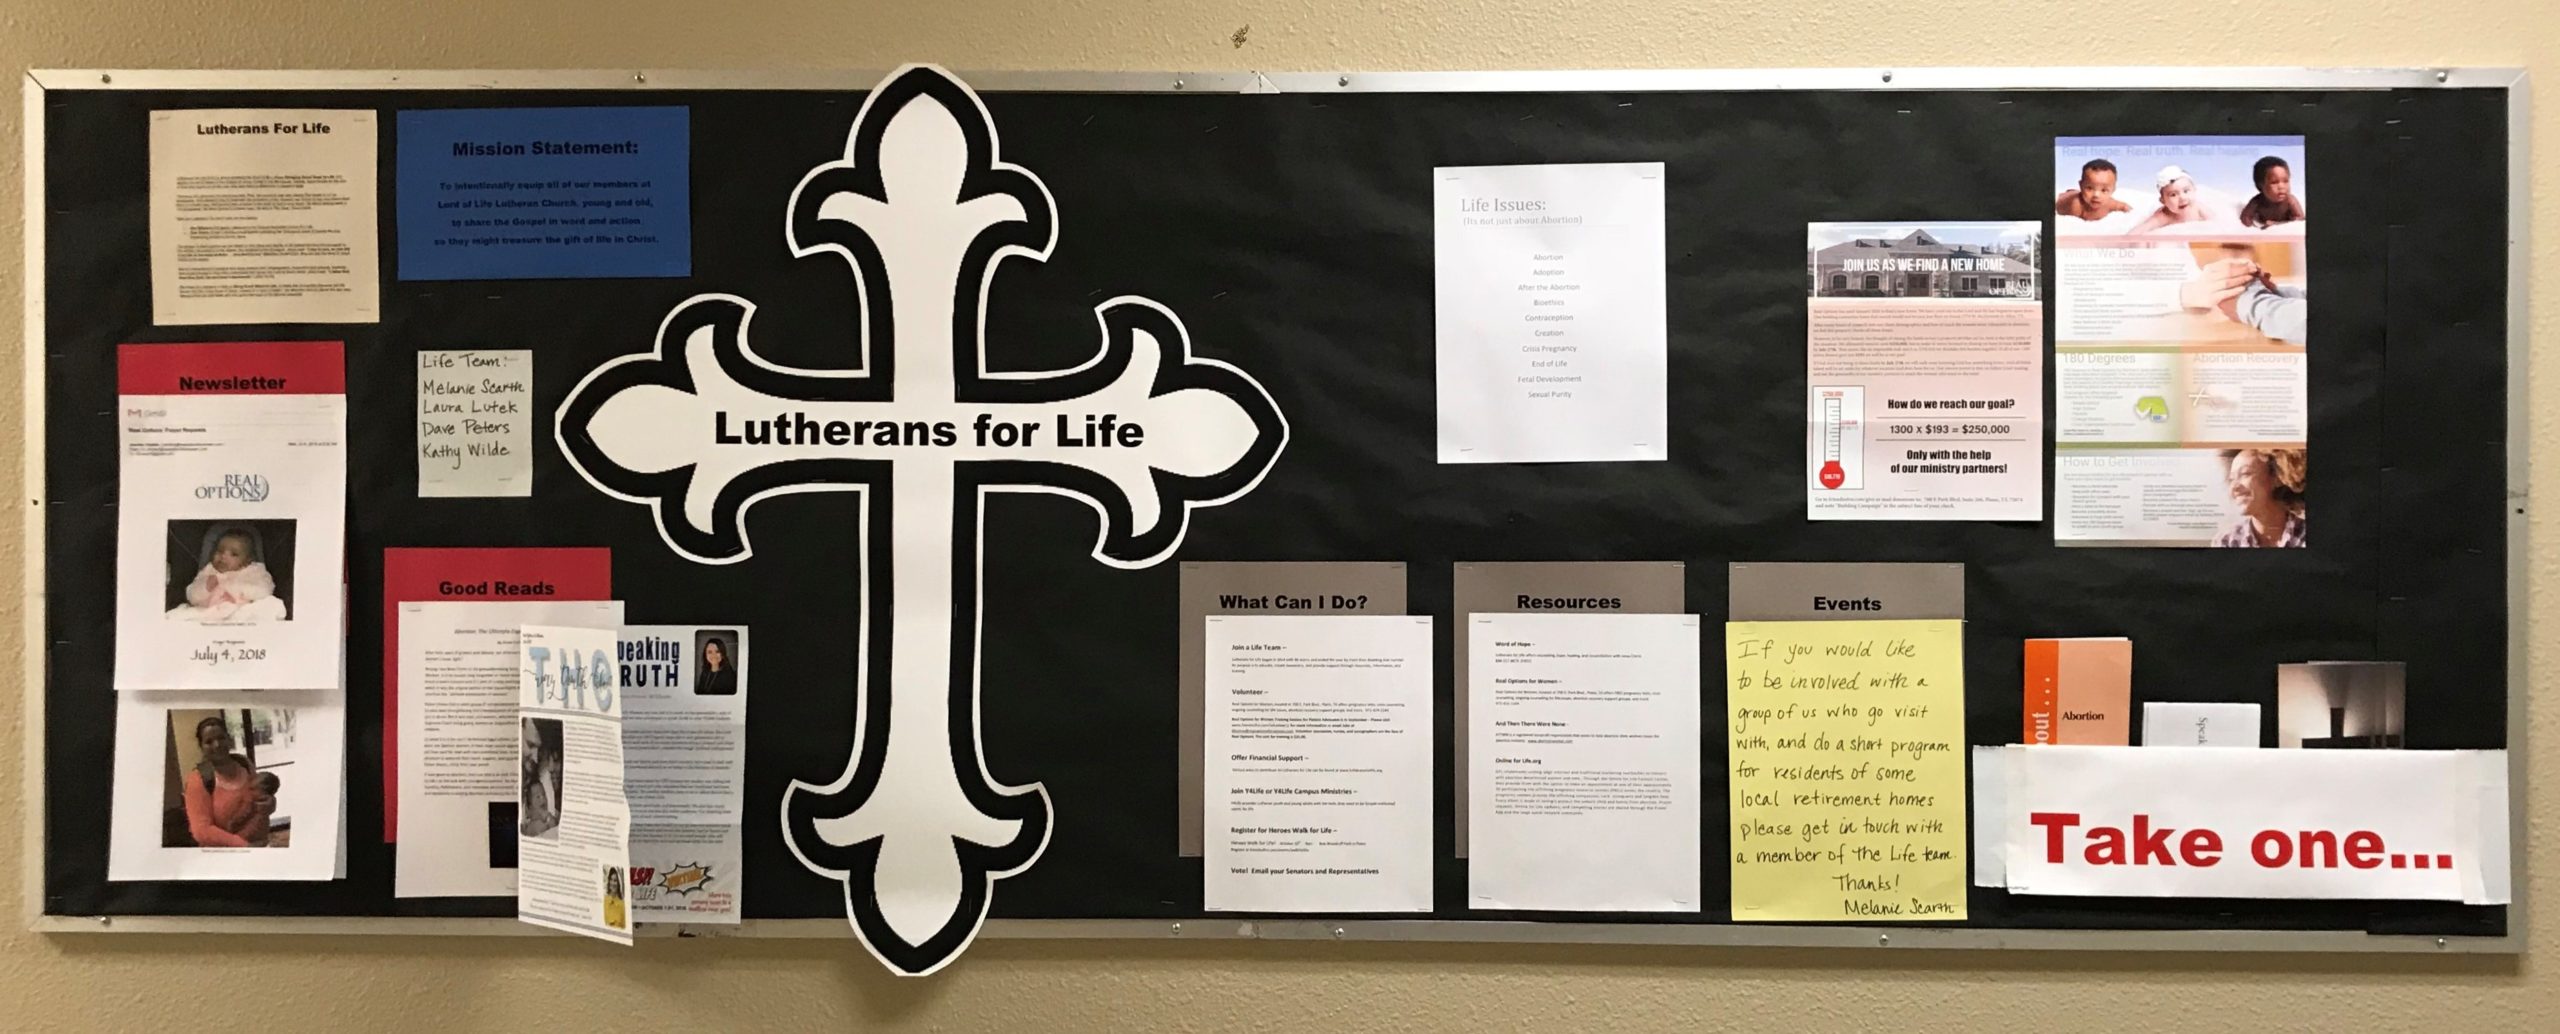 Lutherans For Life in Texas - Lutherans For Life